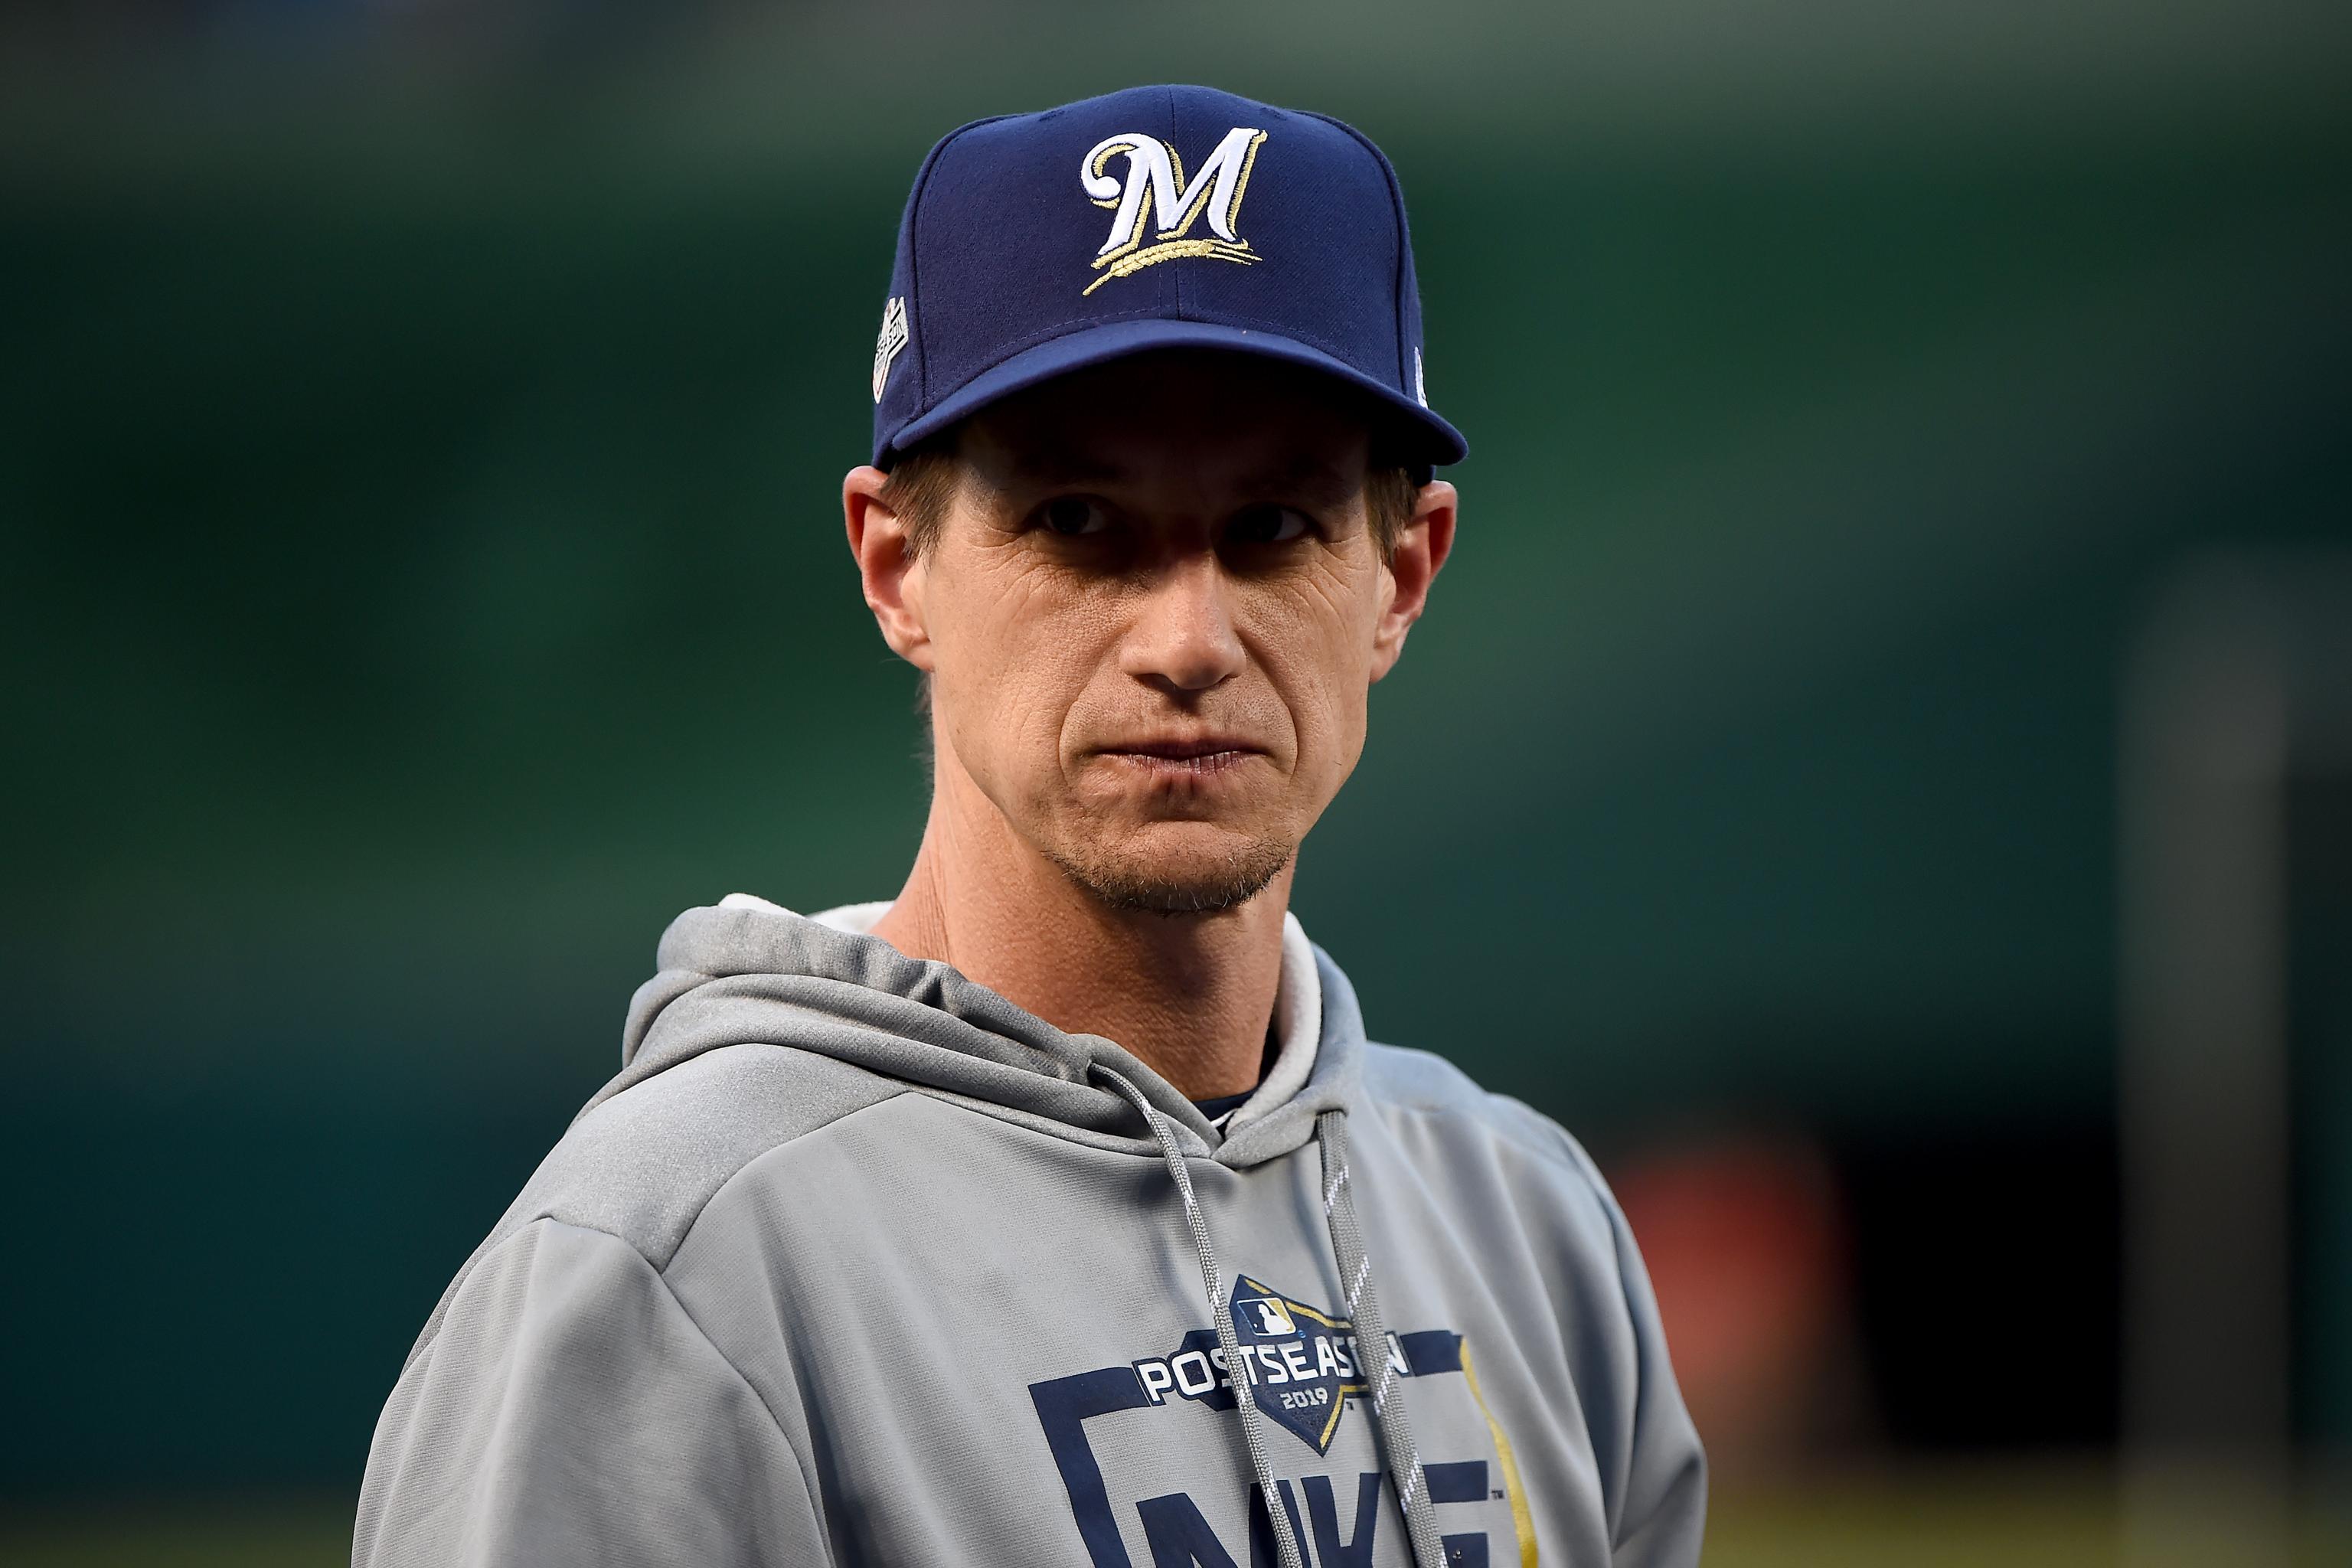 BREWERS: Manager Craig Counsell inks 3-year extension